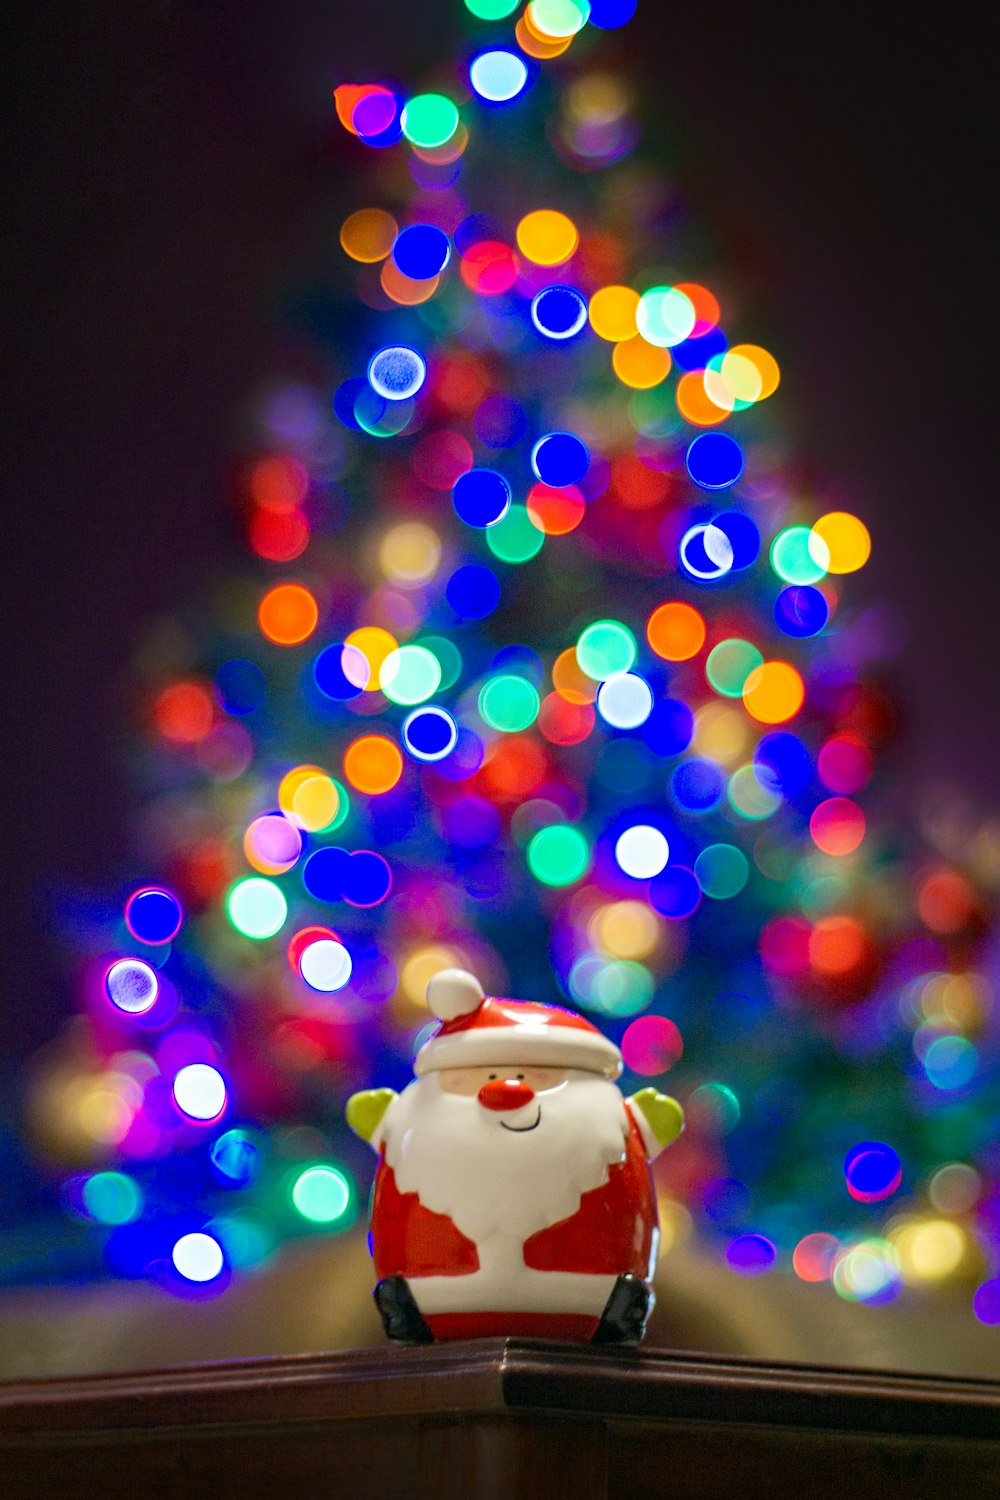 a santa clause figurine sitting in front of a christmas tree